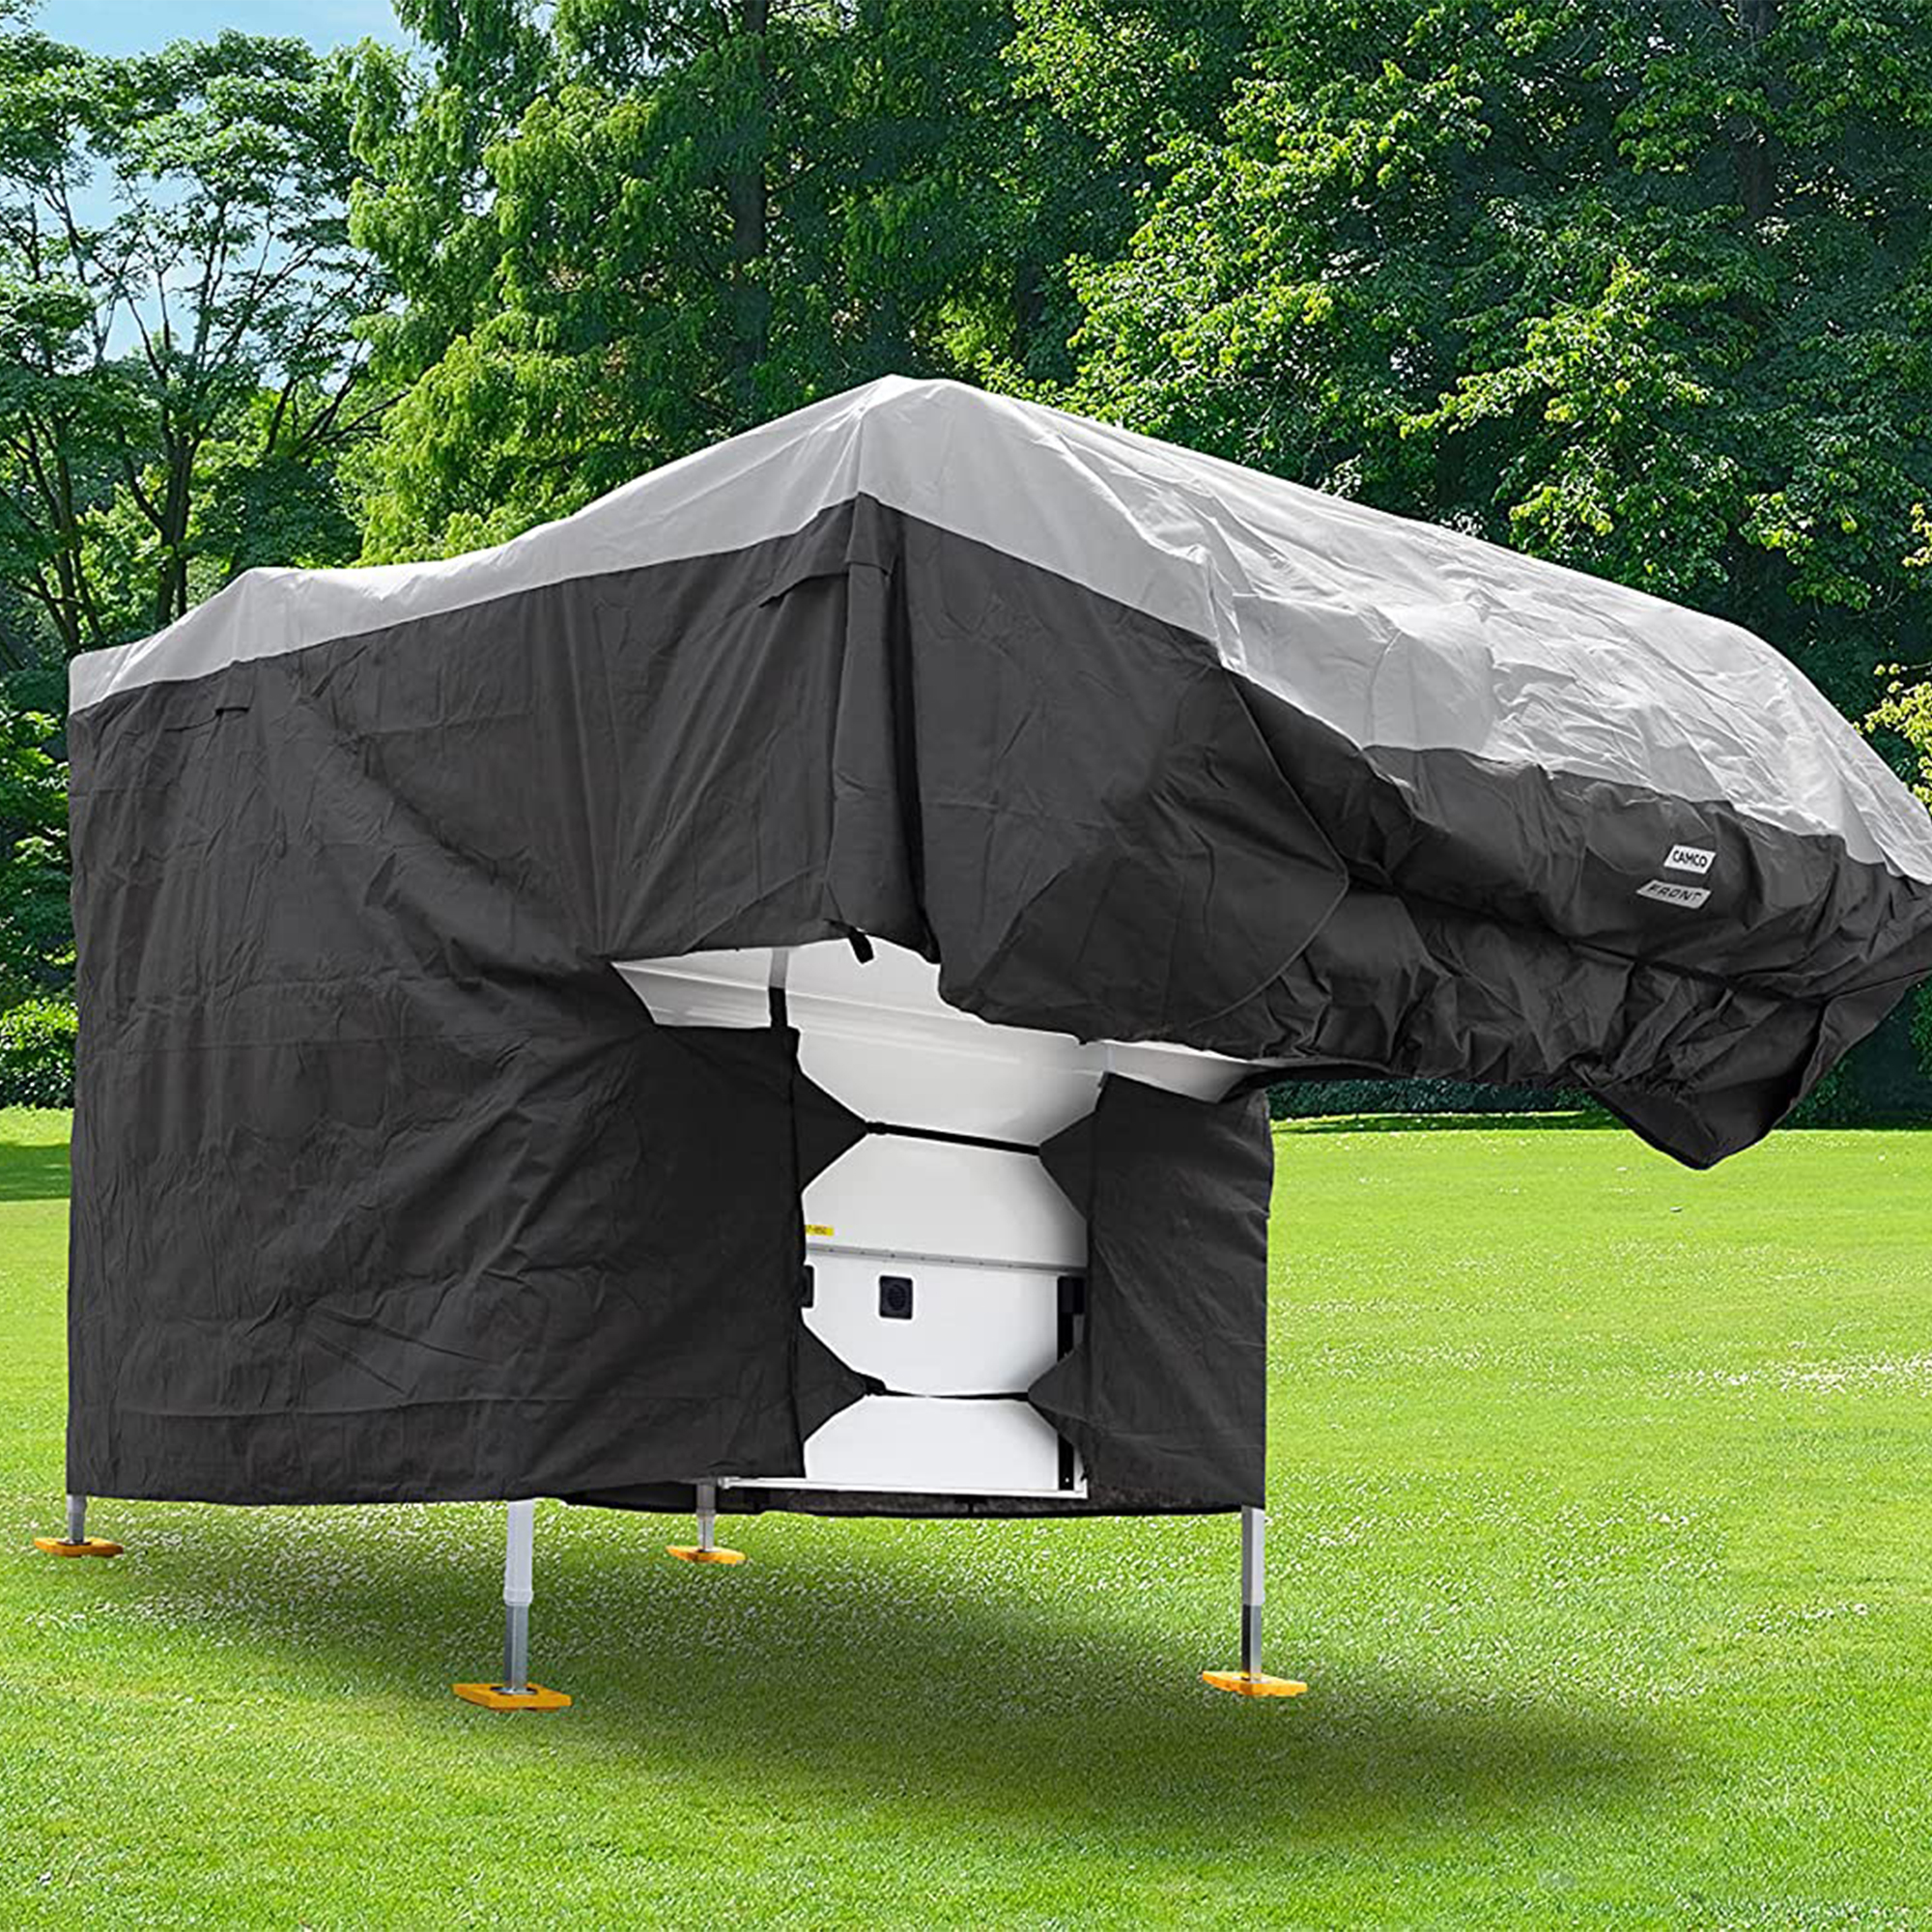 Camco ULTRAGuard Camper/RV Cover Fits Slide-In Campers Up to 19-feet  8-inches Extremely Durable Design that Protects Against the Elements  (45773)